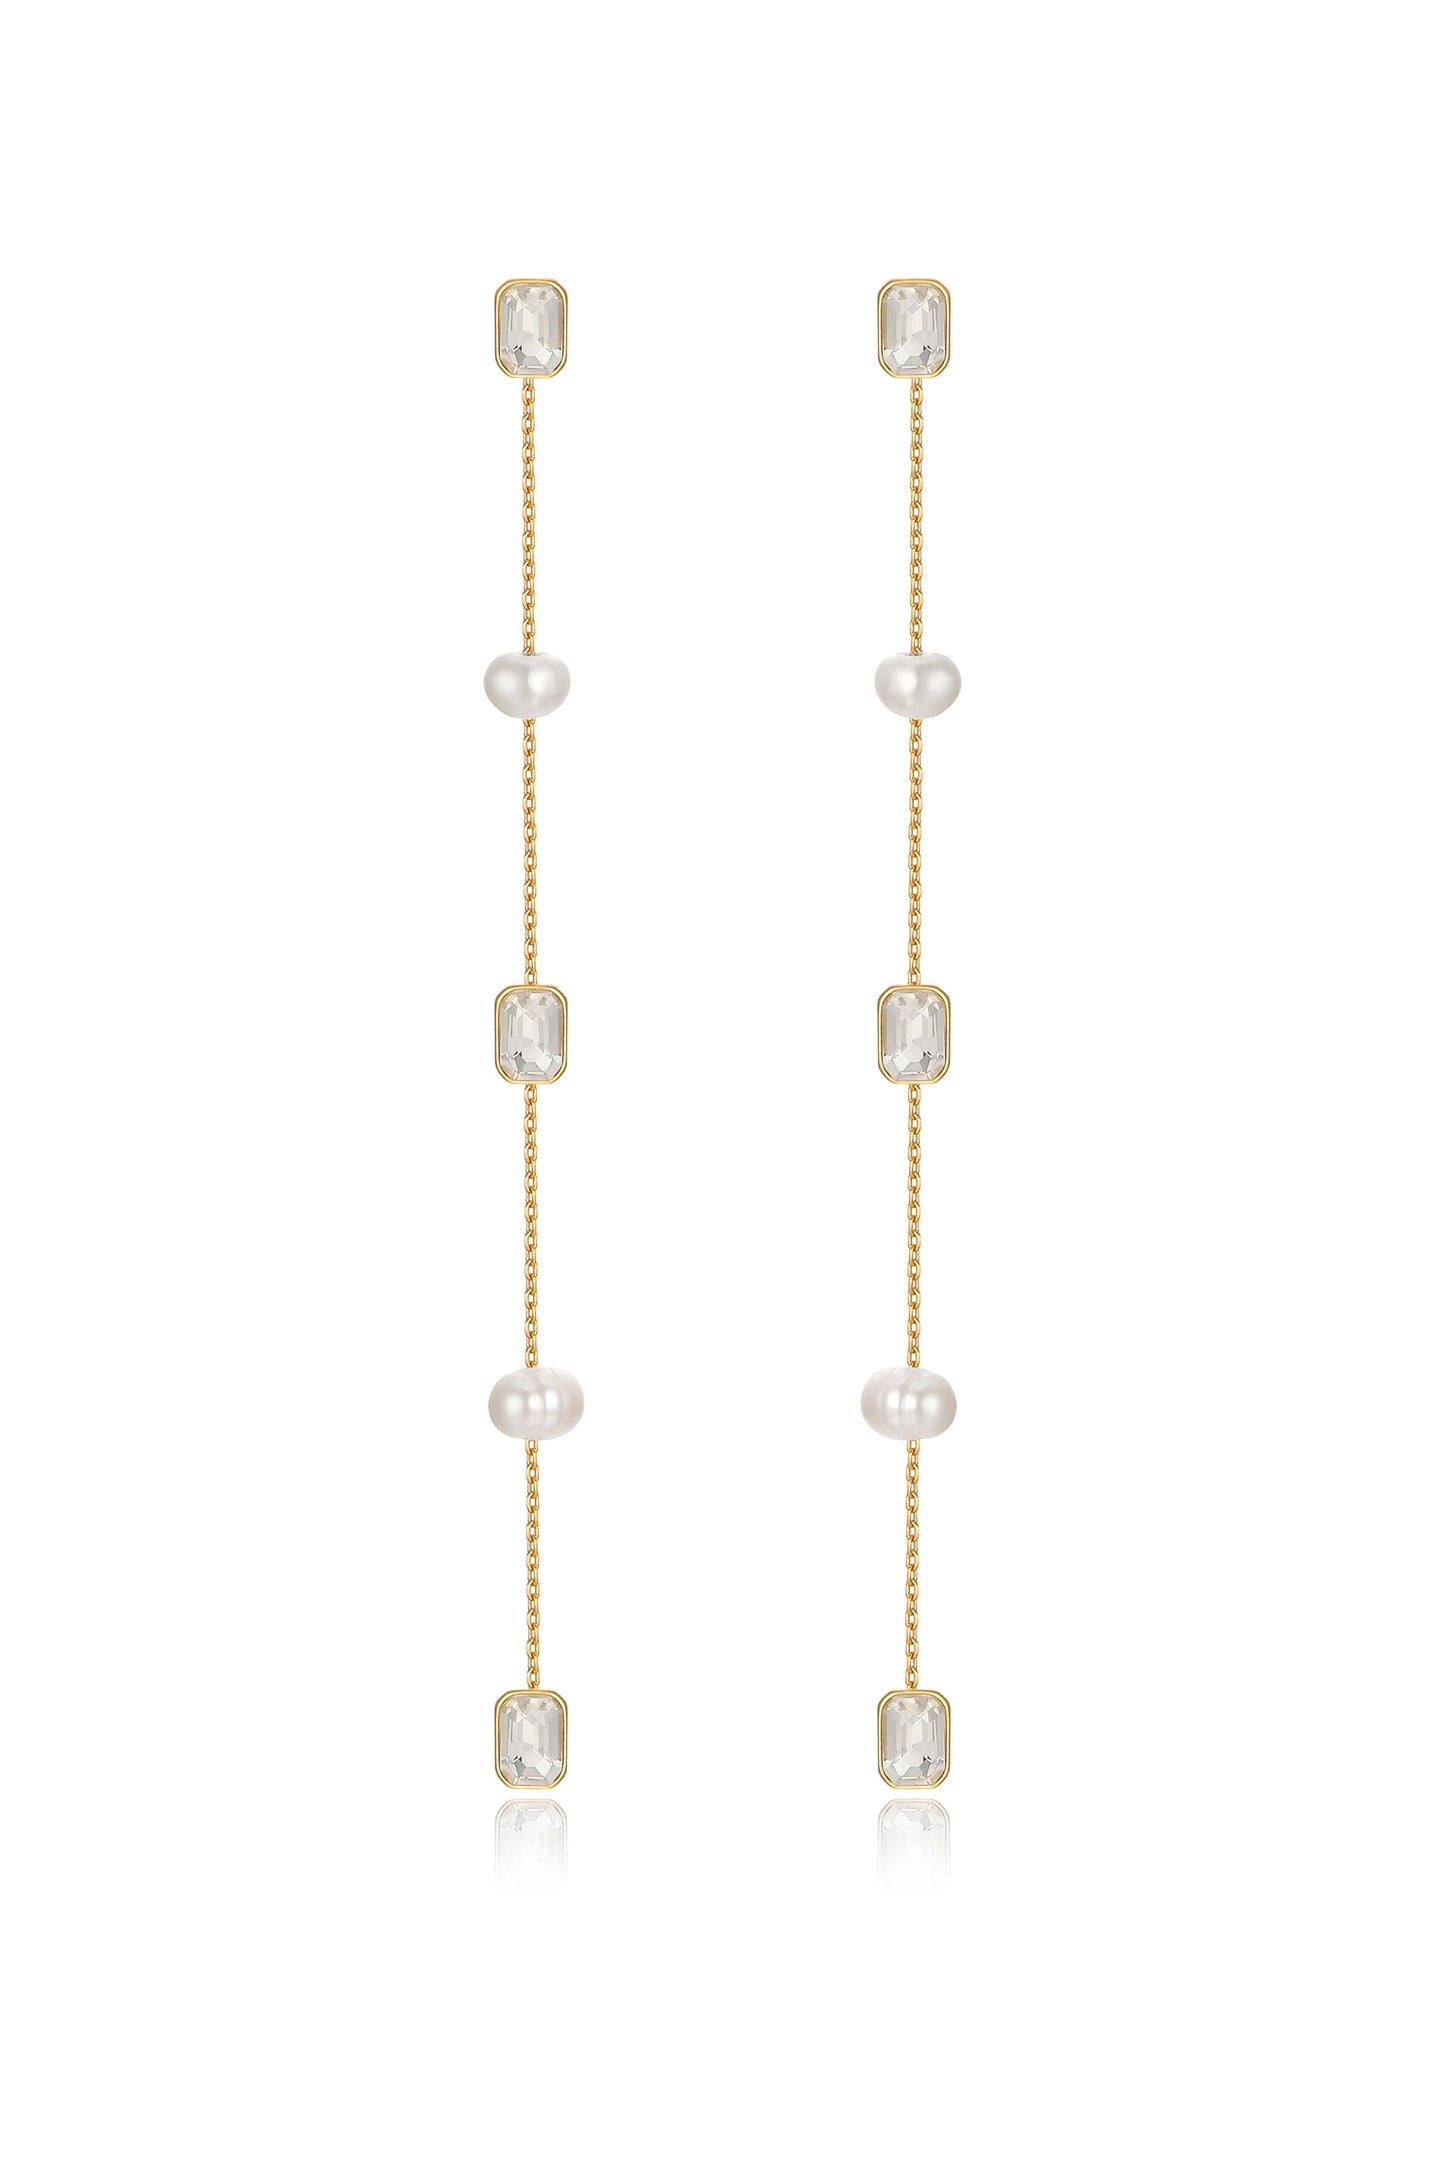 Pearl and Crystal Linear Drop Earrings on white